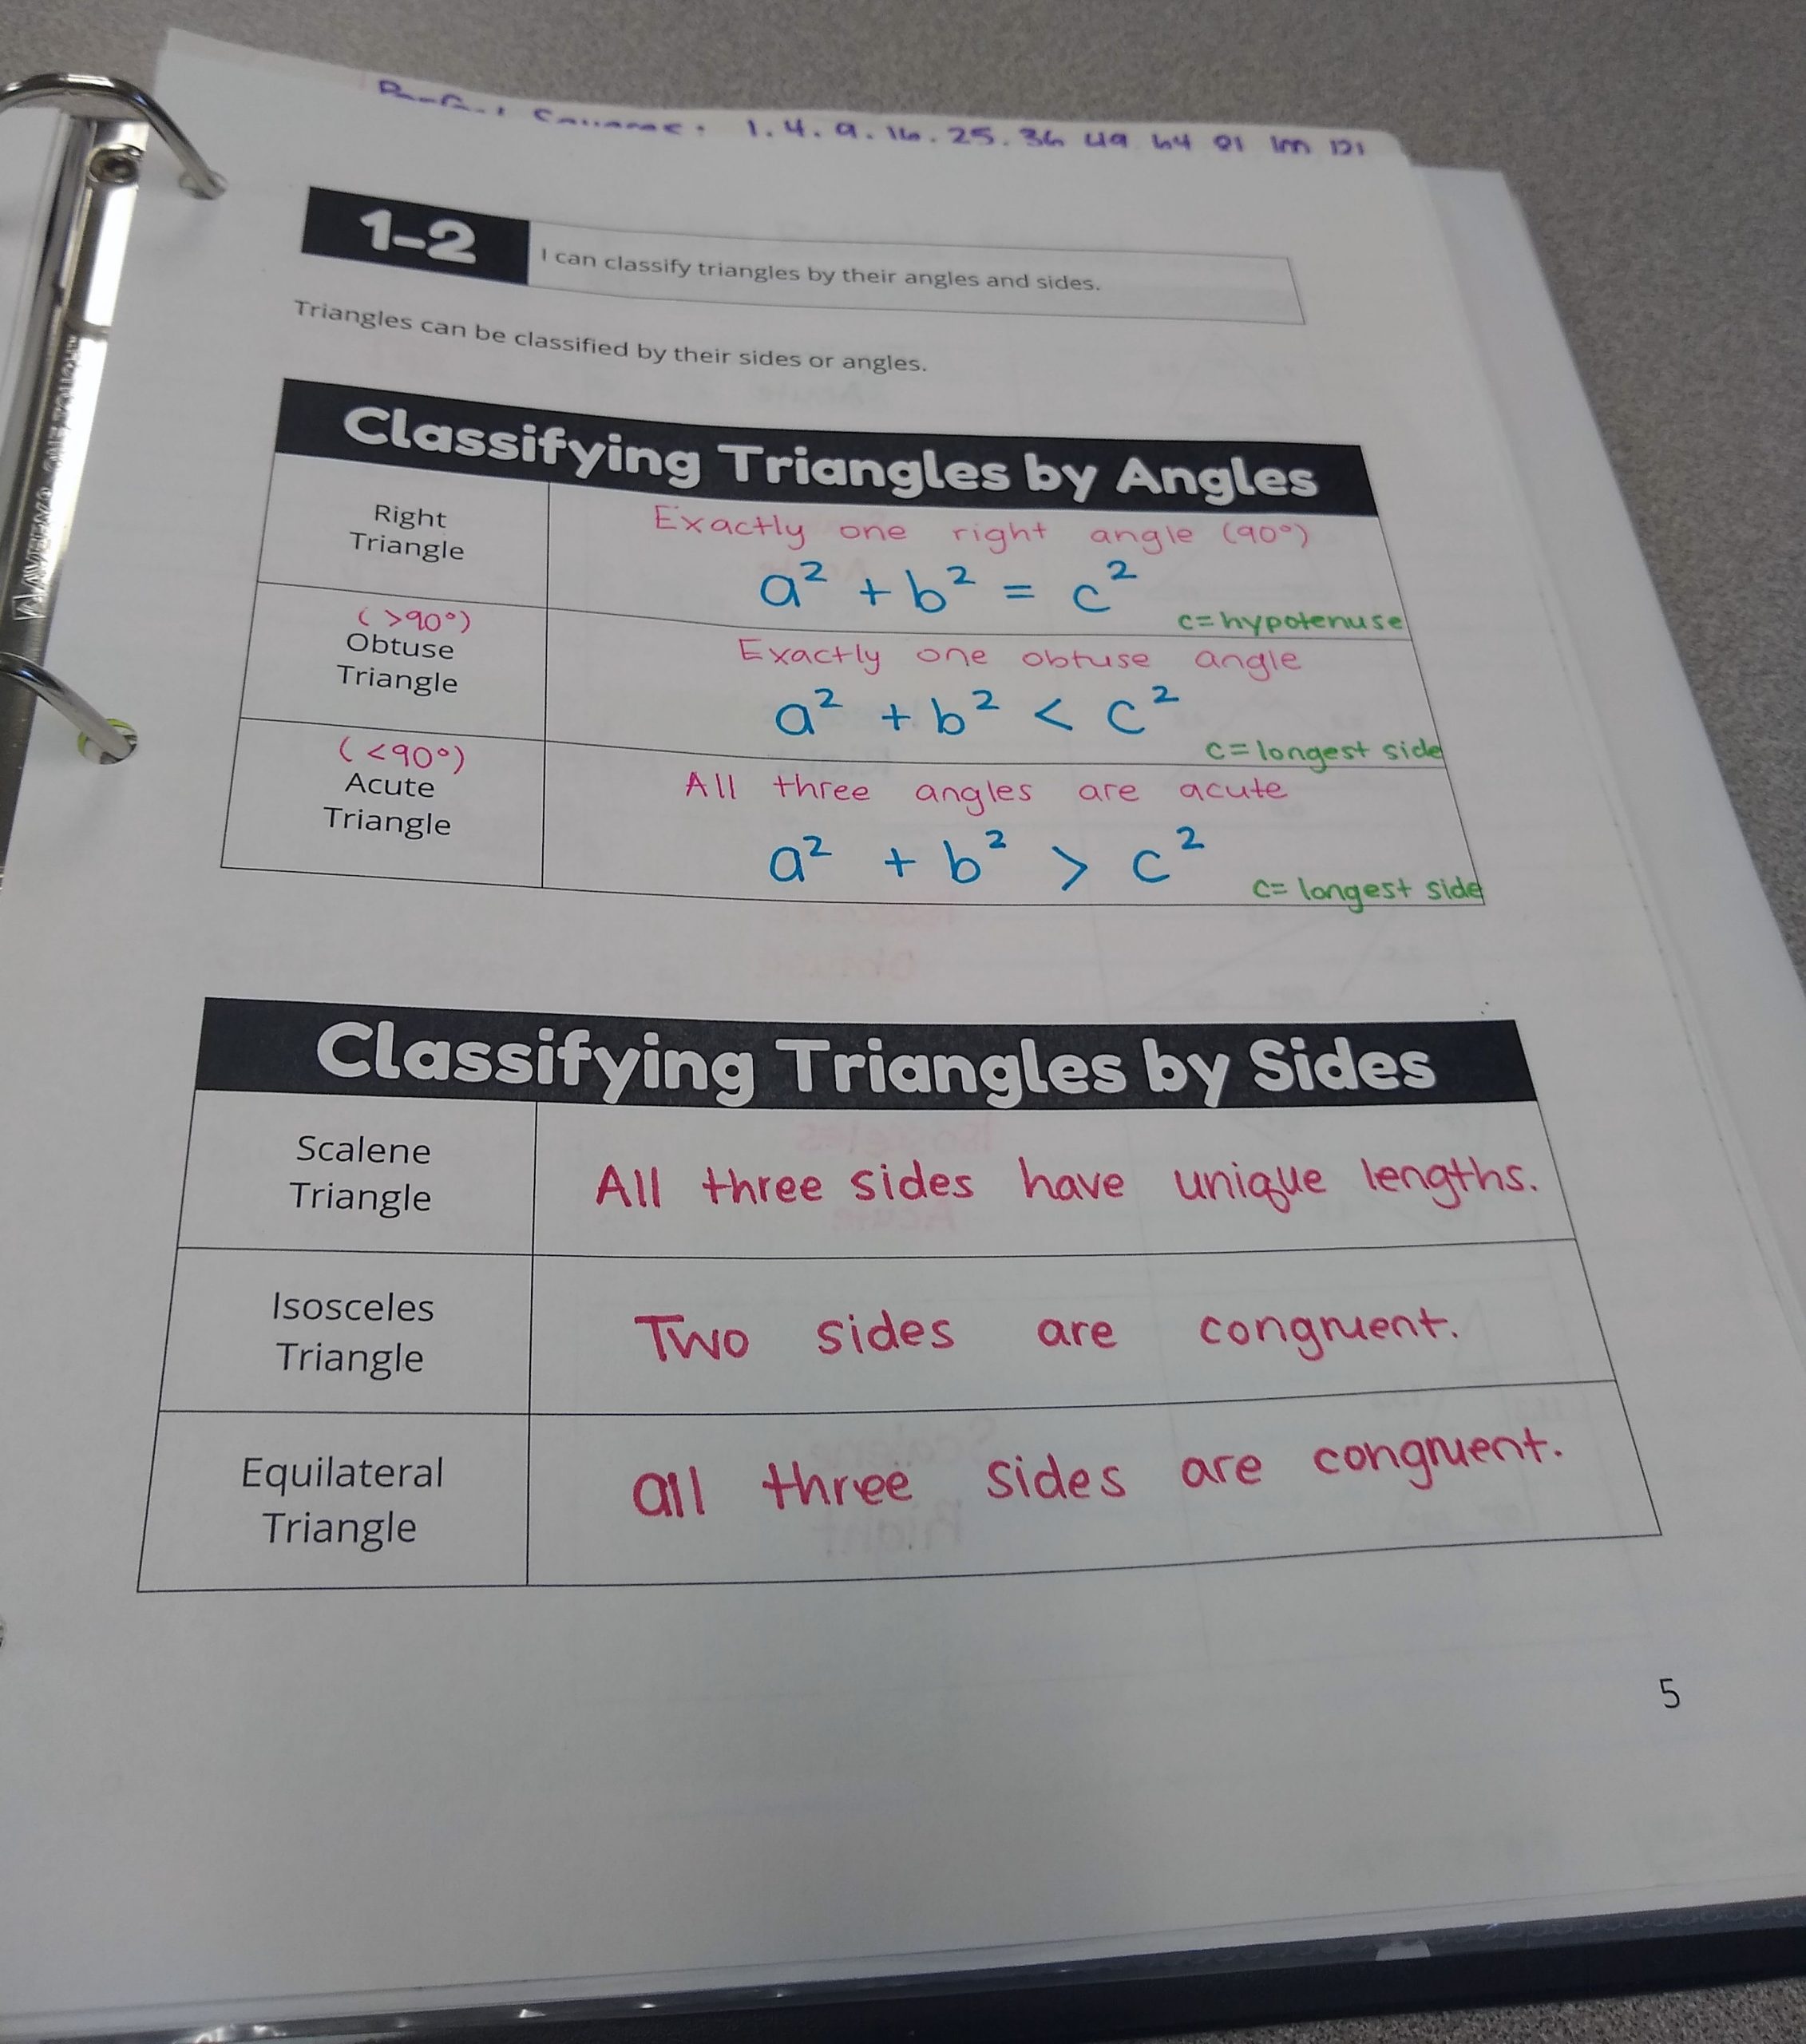 Classifying Triangle Notes.